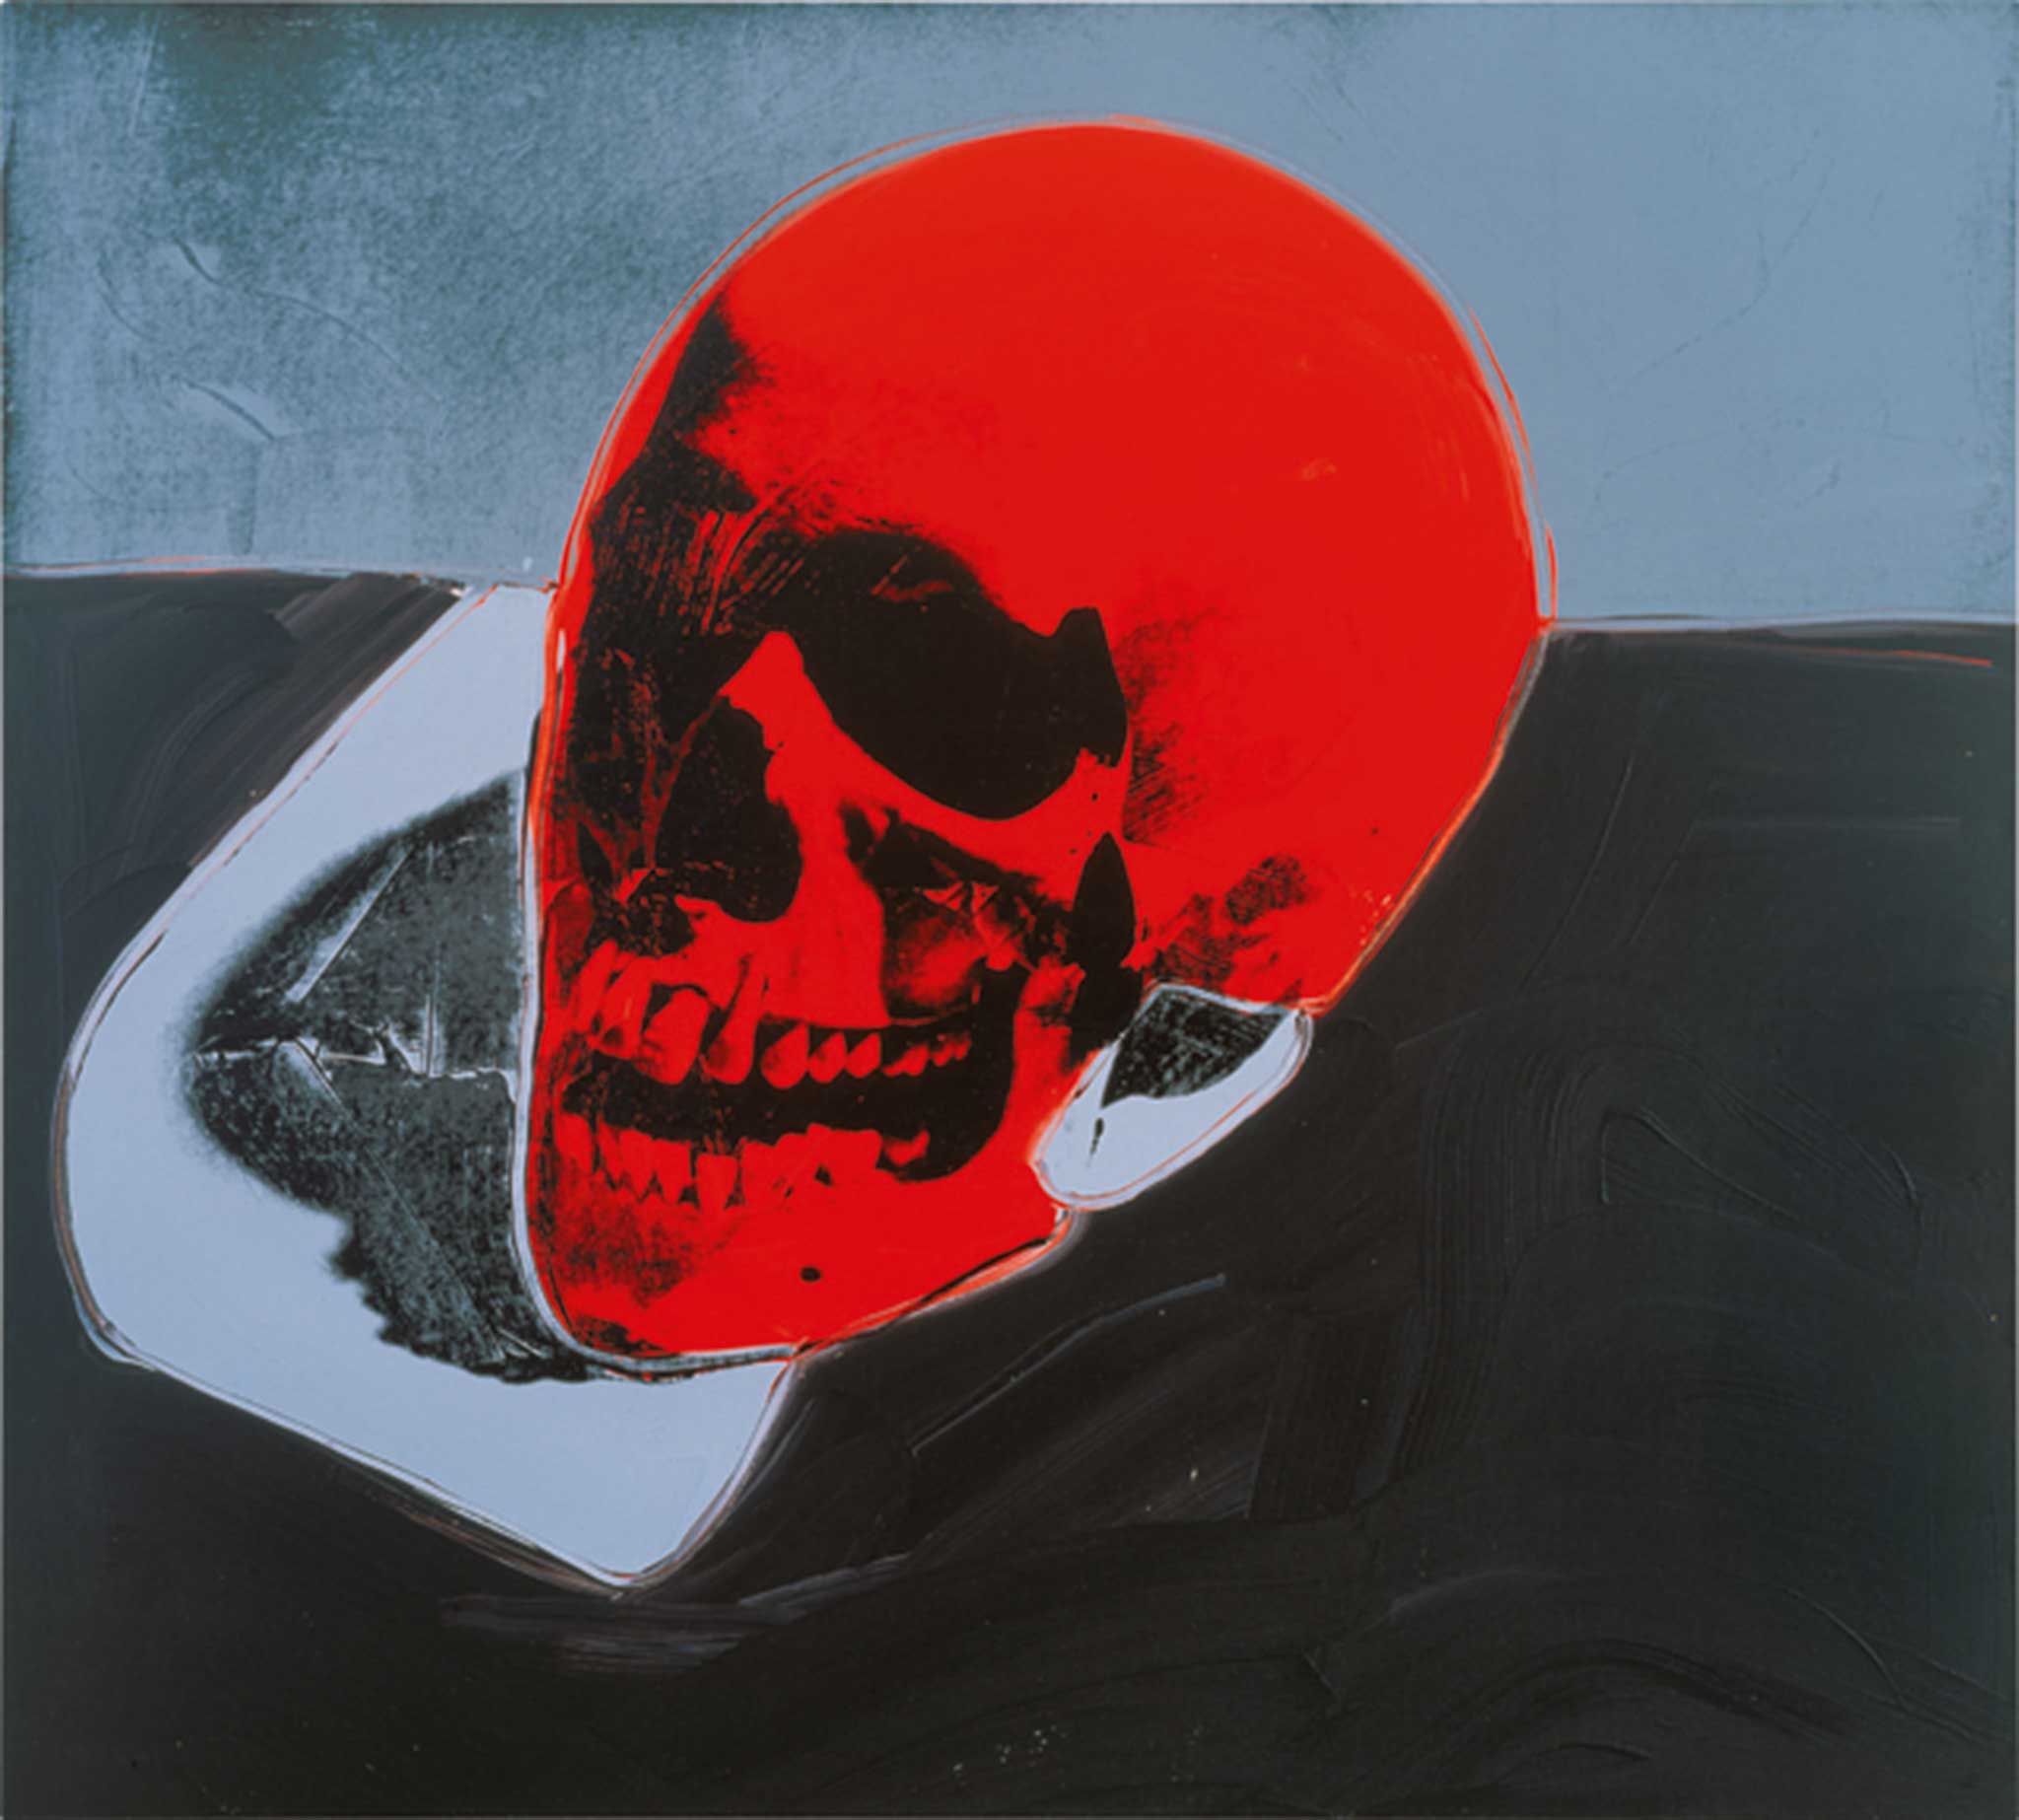 Skull, 1976 by Andy Warhol © 2015 The Andy Warhol Foundation for the Visual Arts, Inc. / Artists Rights Society (ARS), New York